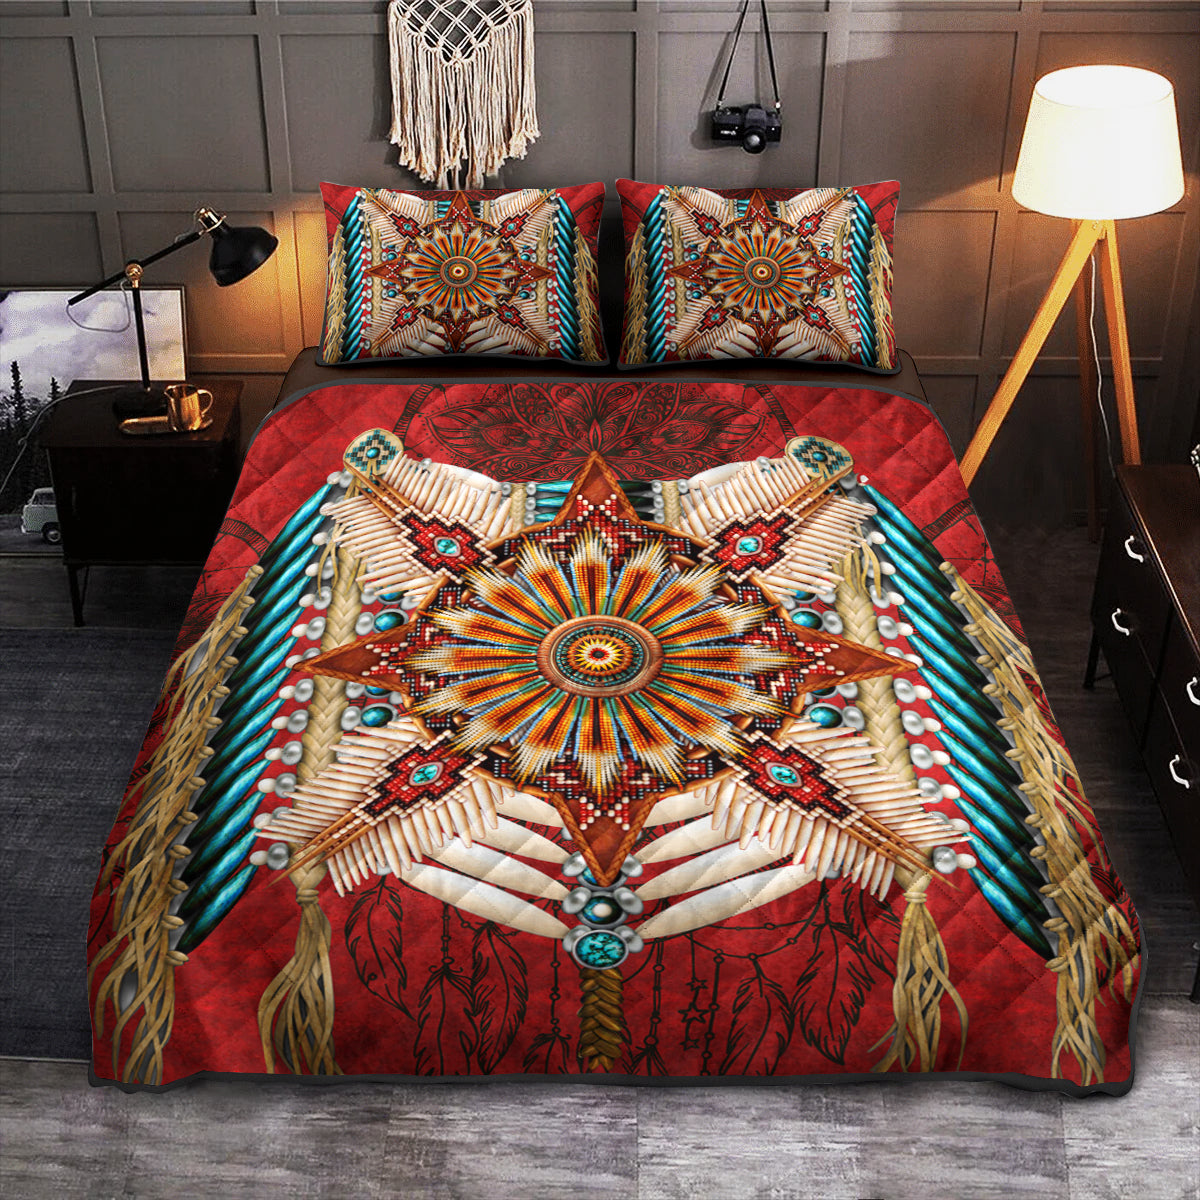 Native American Inspired Quilt Bed Sheet HN090907T